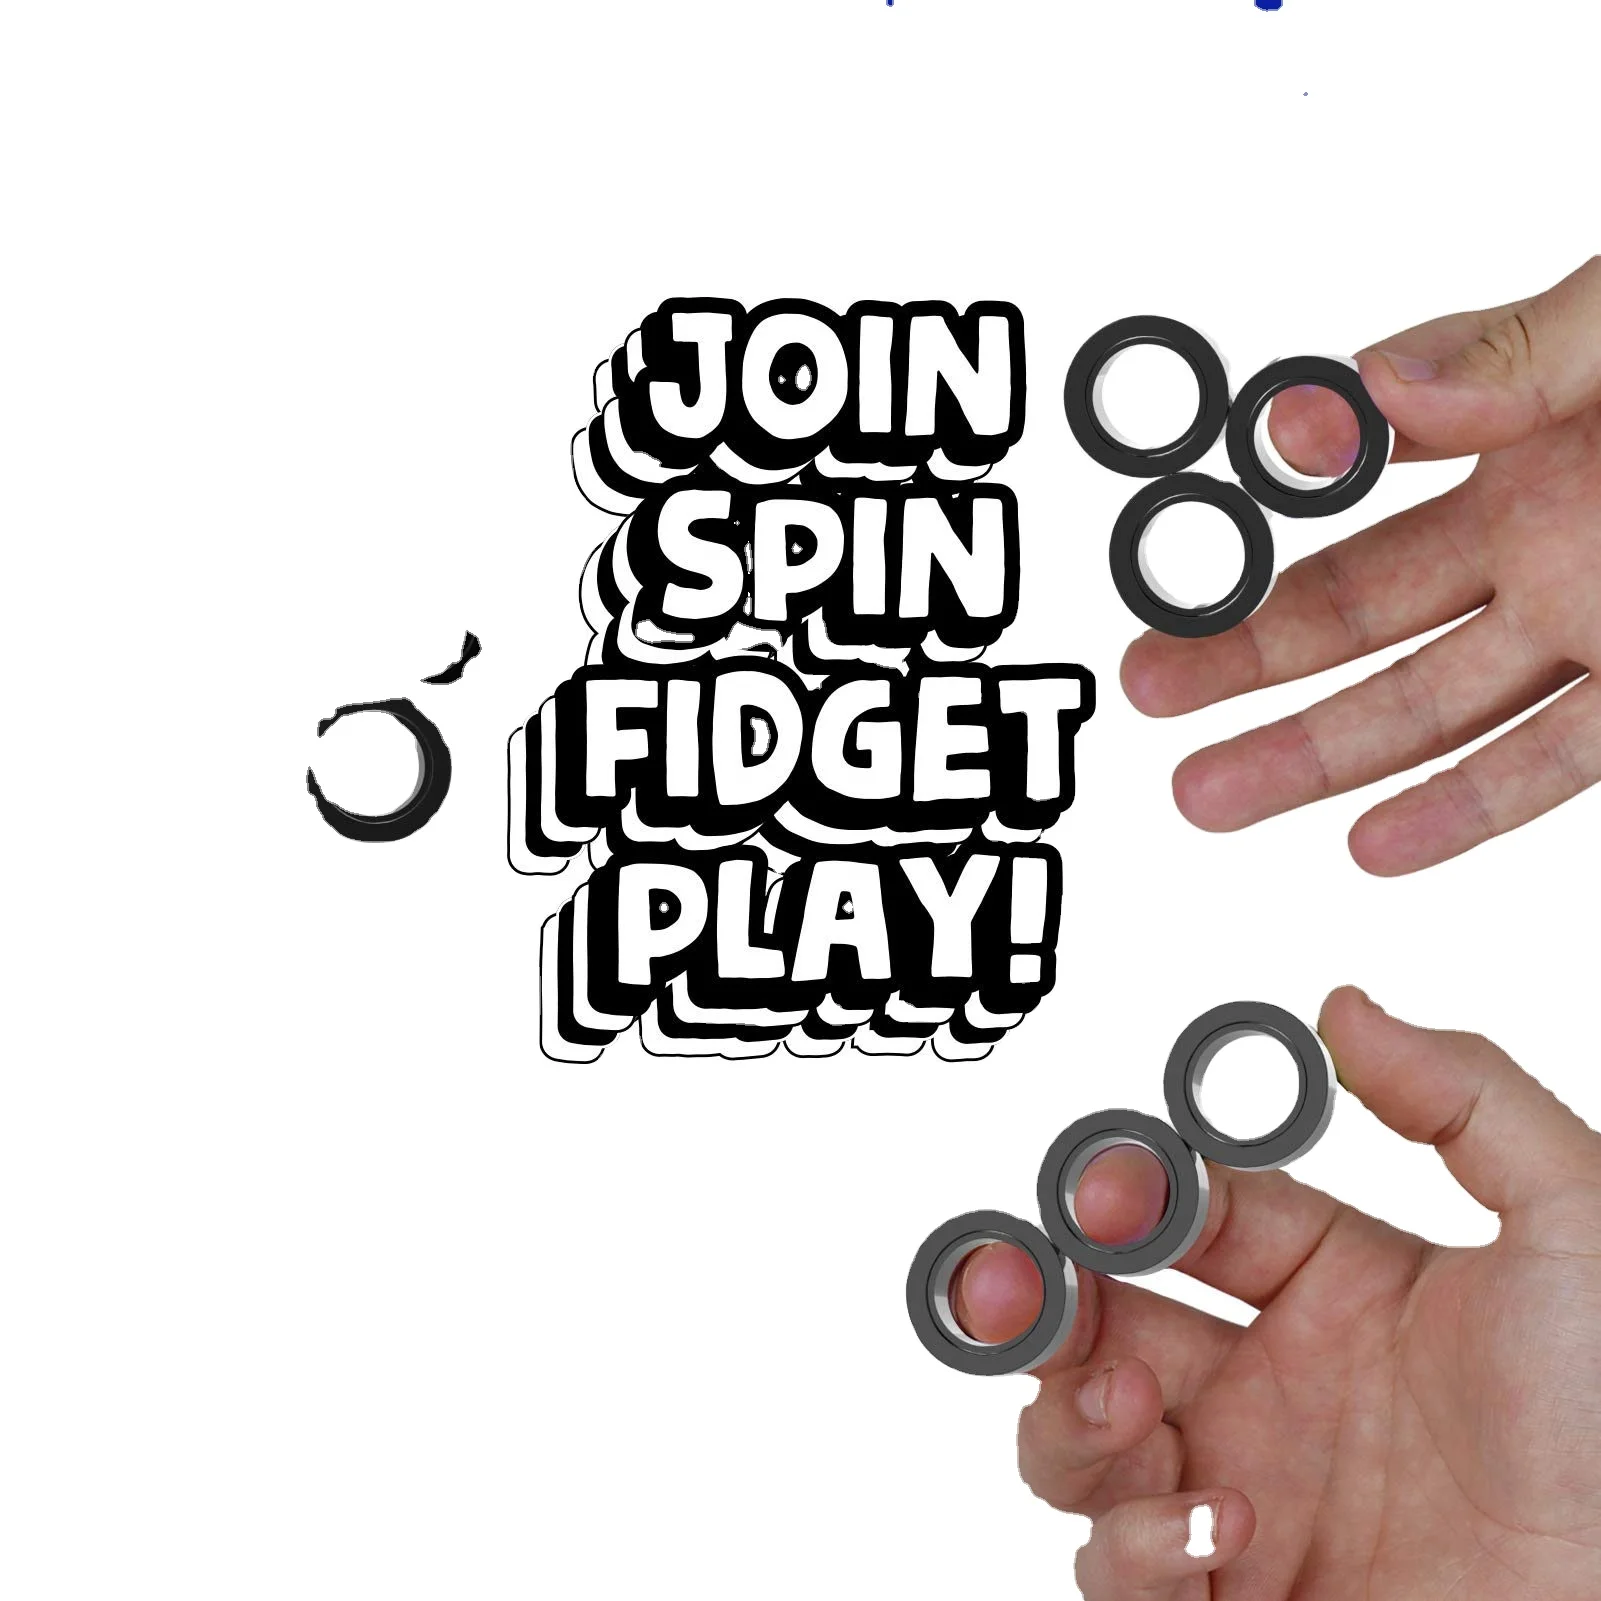 Hot Sale Infinity Cube Fidget Toy Stress Relief Fidget Spinner Magnet Training Tools Magnetic Ring Buy Infinity Cube Fidget Toy Fidget Spinner Magnetic Ring Product On Alibaba Com